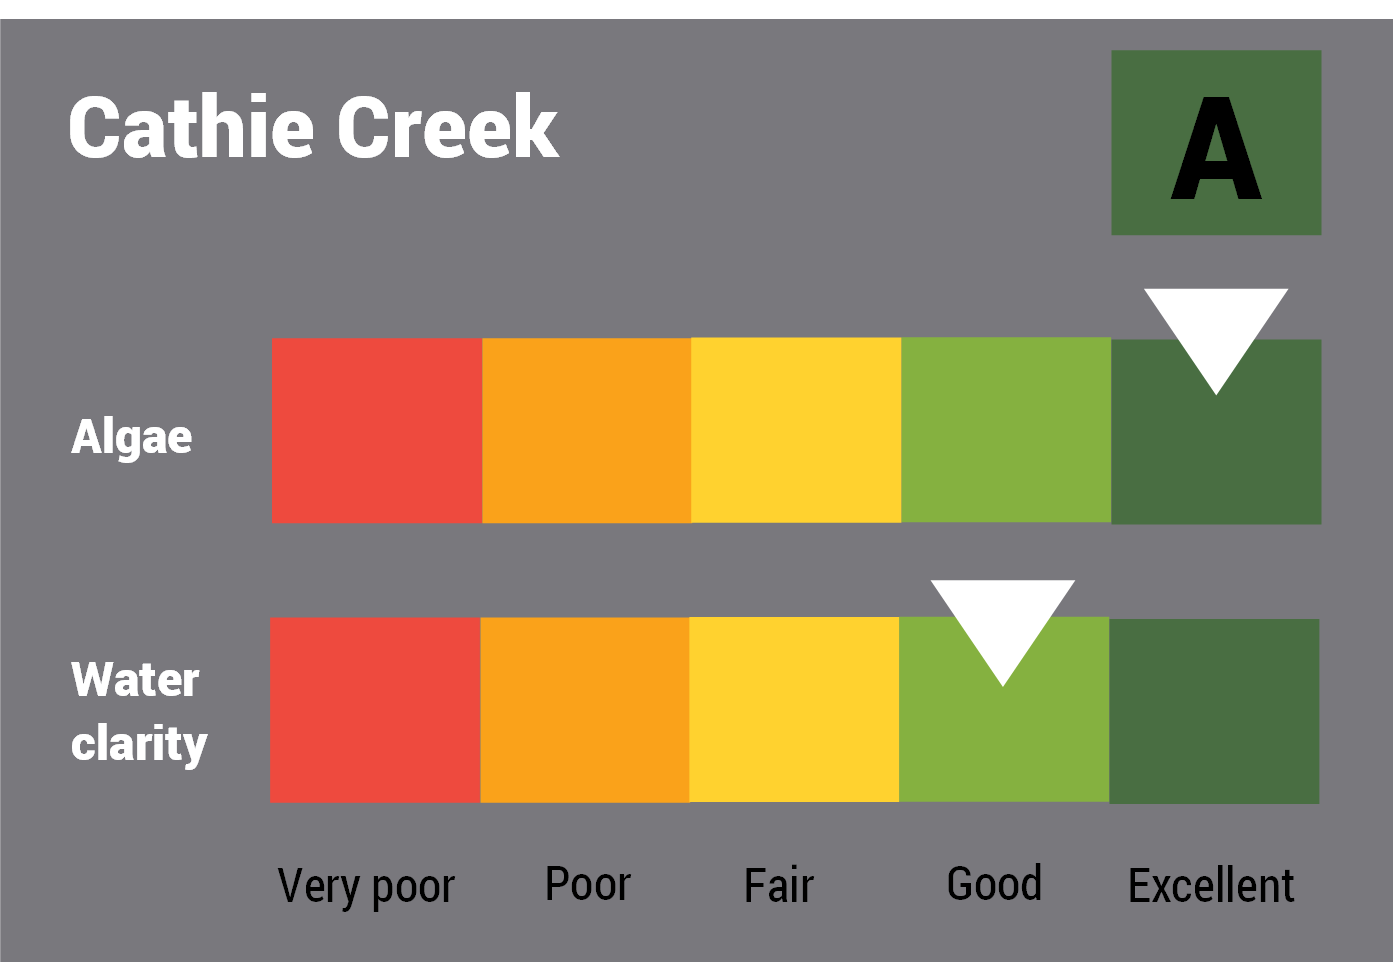 Cathie Creek water quality report card for algae and water clarity showing colour-coded ratings (red, orange, yellow, light green and dark green, which represent very poor, poor, fair, good and excellent, respectively). Algae is rated 'good' and water clarity is rated 'excellent' giving an overall rating of 'excellent' or 'A'.